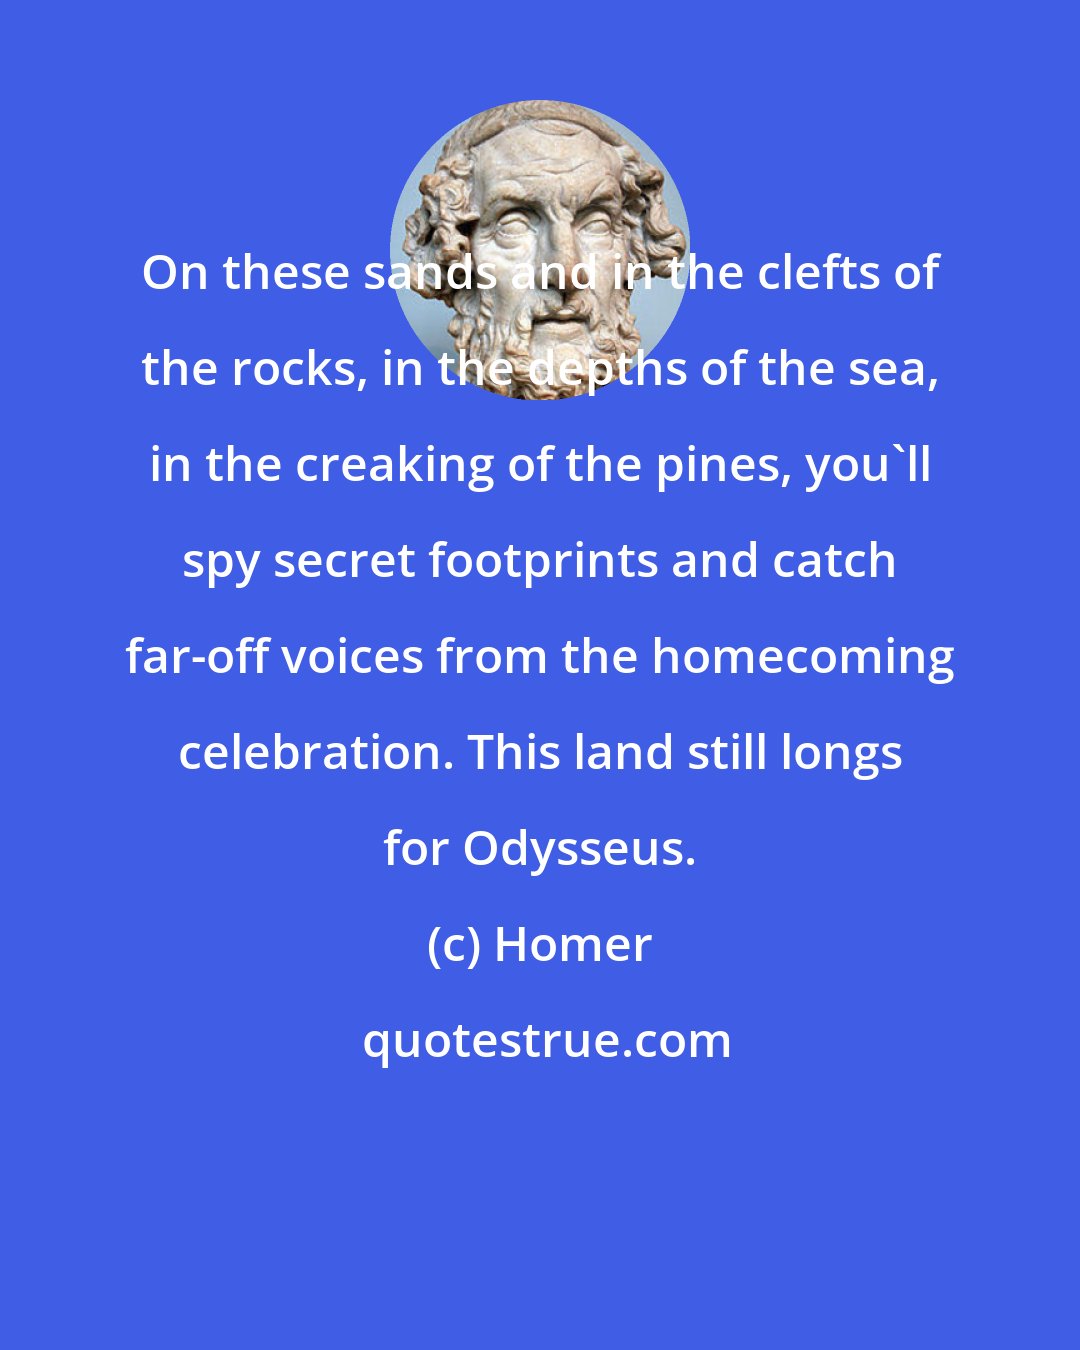 Homer: On these sands and in the clefts of the rocks, in the depths of the sea, in the creaking of the pines, you'll spy secret footprints and catch far-off voices from the homecoming celebration. This land still longs for Odysseus.